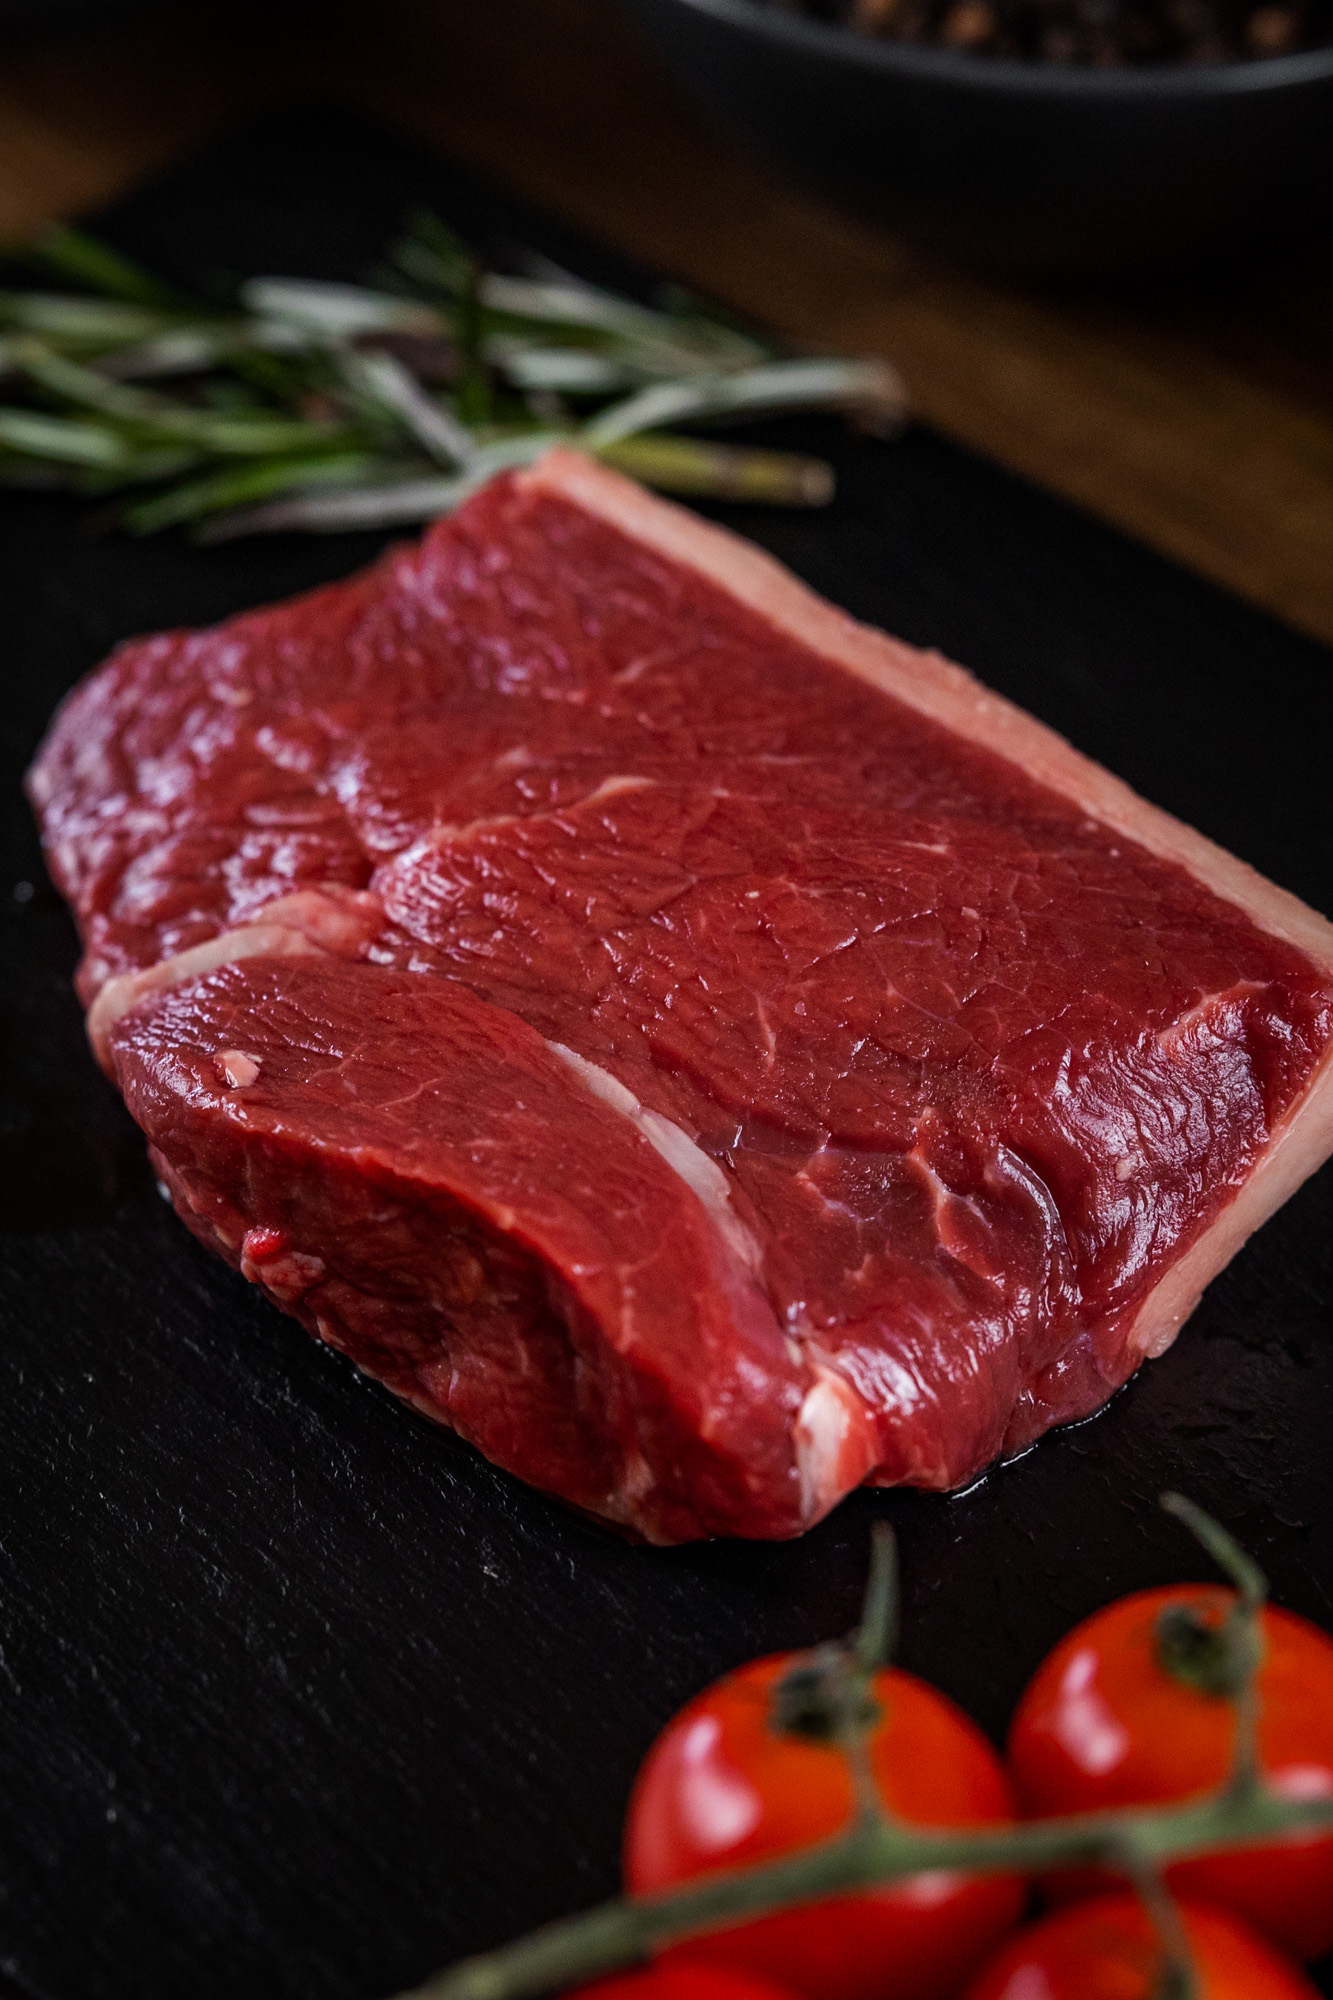 Blue Carbon Farming Company - Steaks, ribeye, sirloin meat boxes - commercial, brand, lifestyle and food photographer video production, bridgwater, somerset, uk IMPACT 20twenty-23